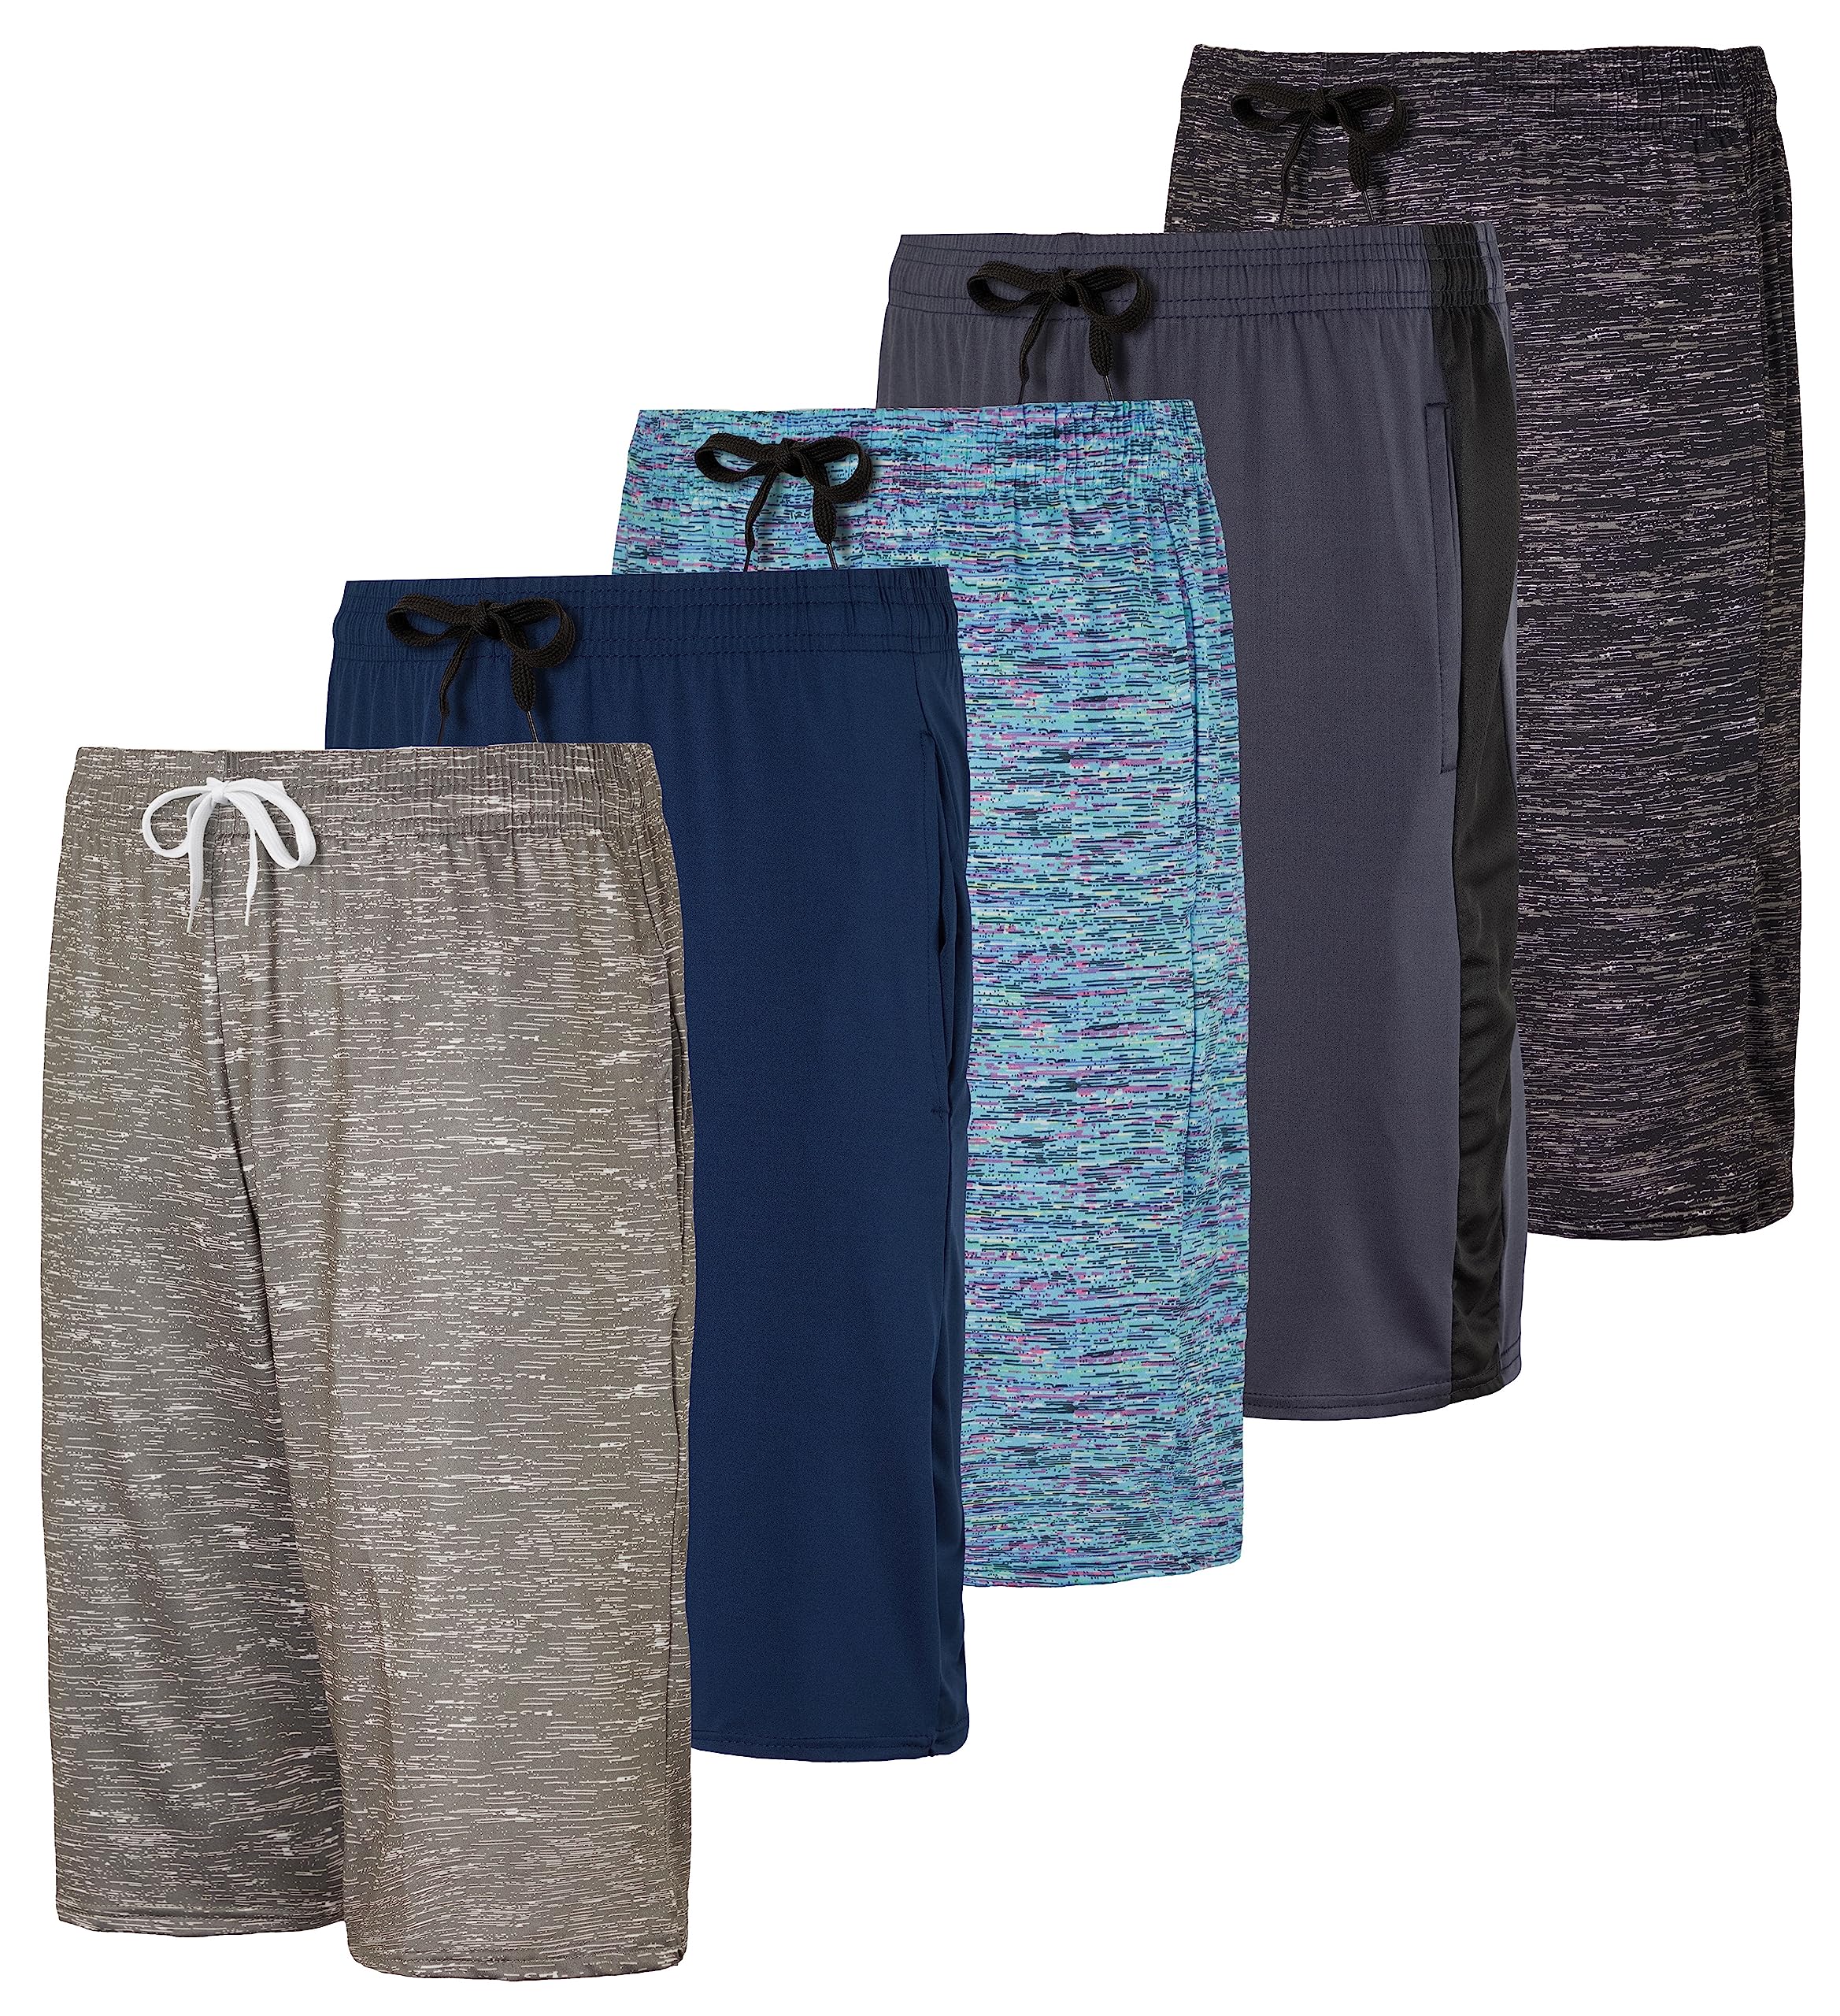 Real Essentials 5-Pack Boys' Dry-Fit Active Athletic Performance Basketball Shorts with Pockets